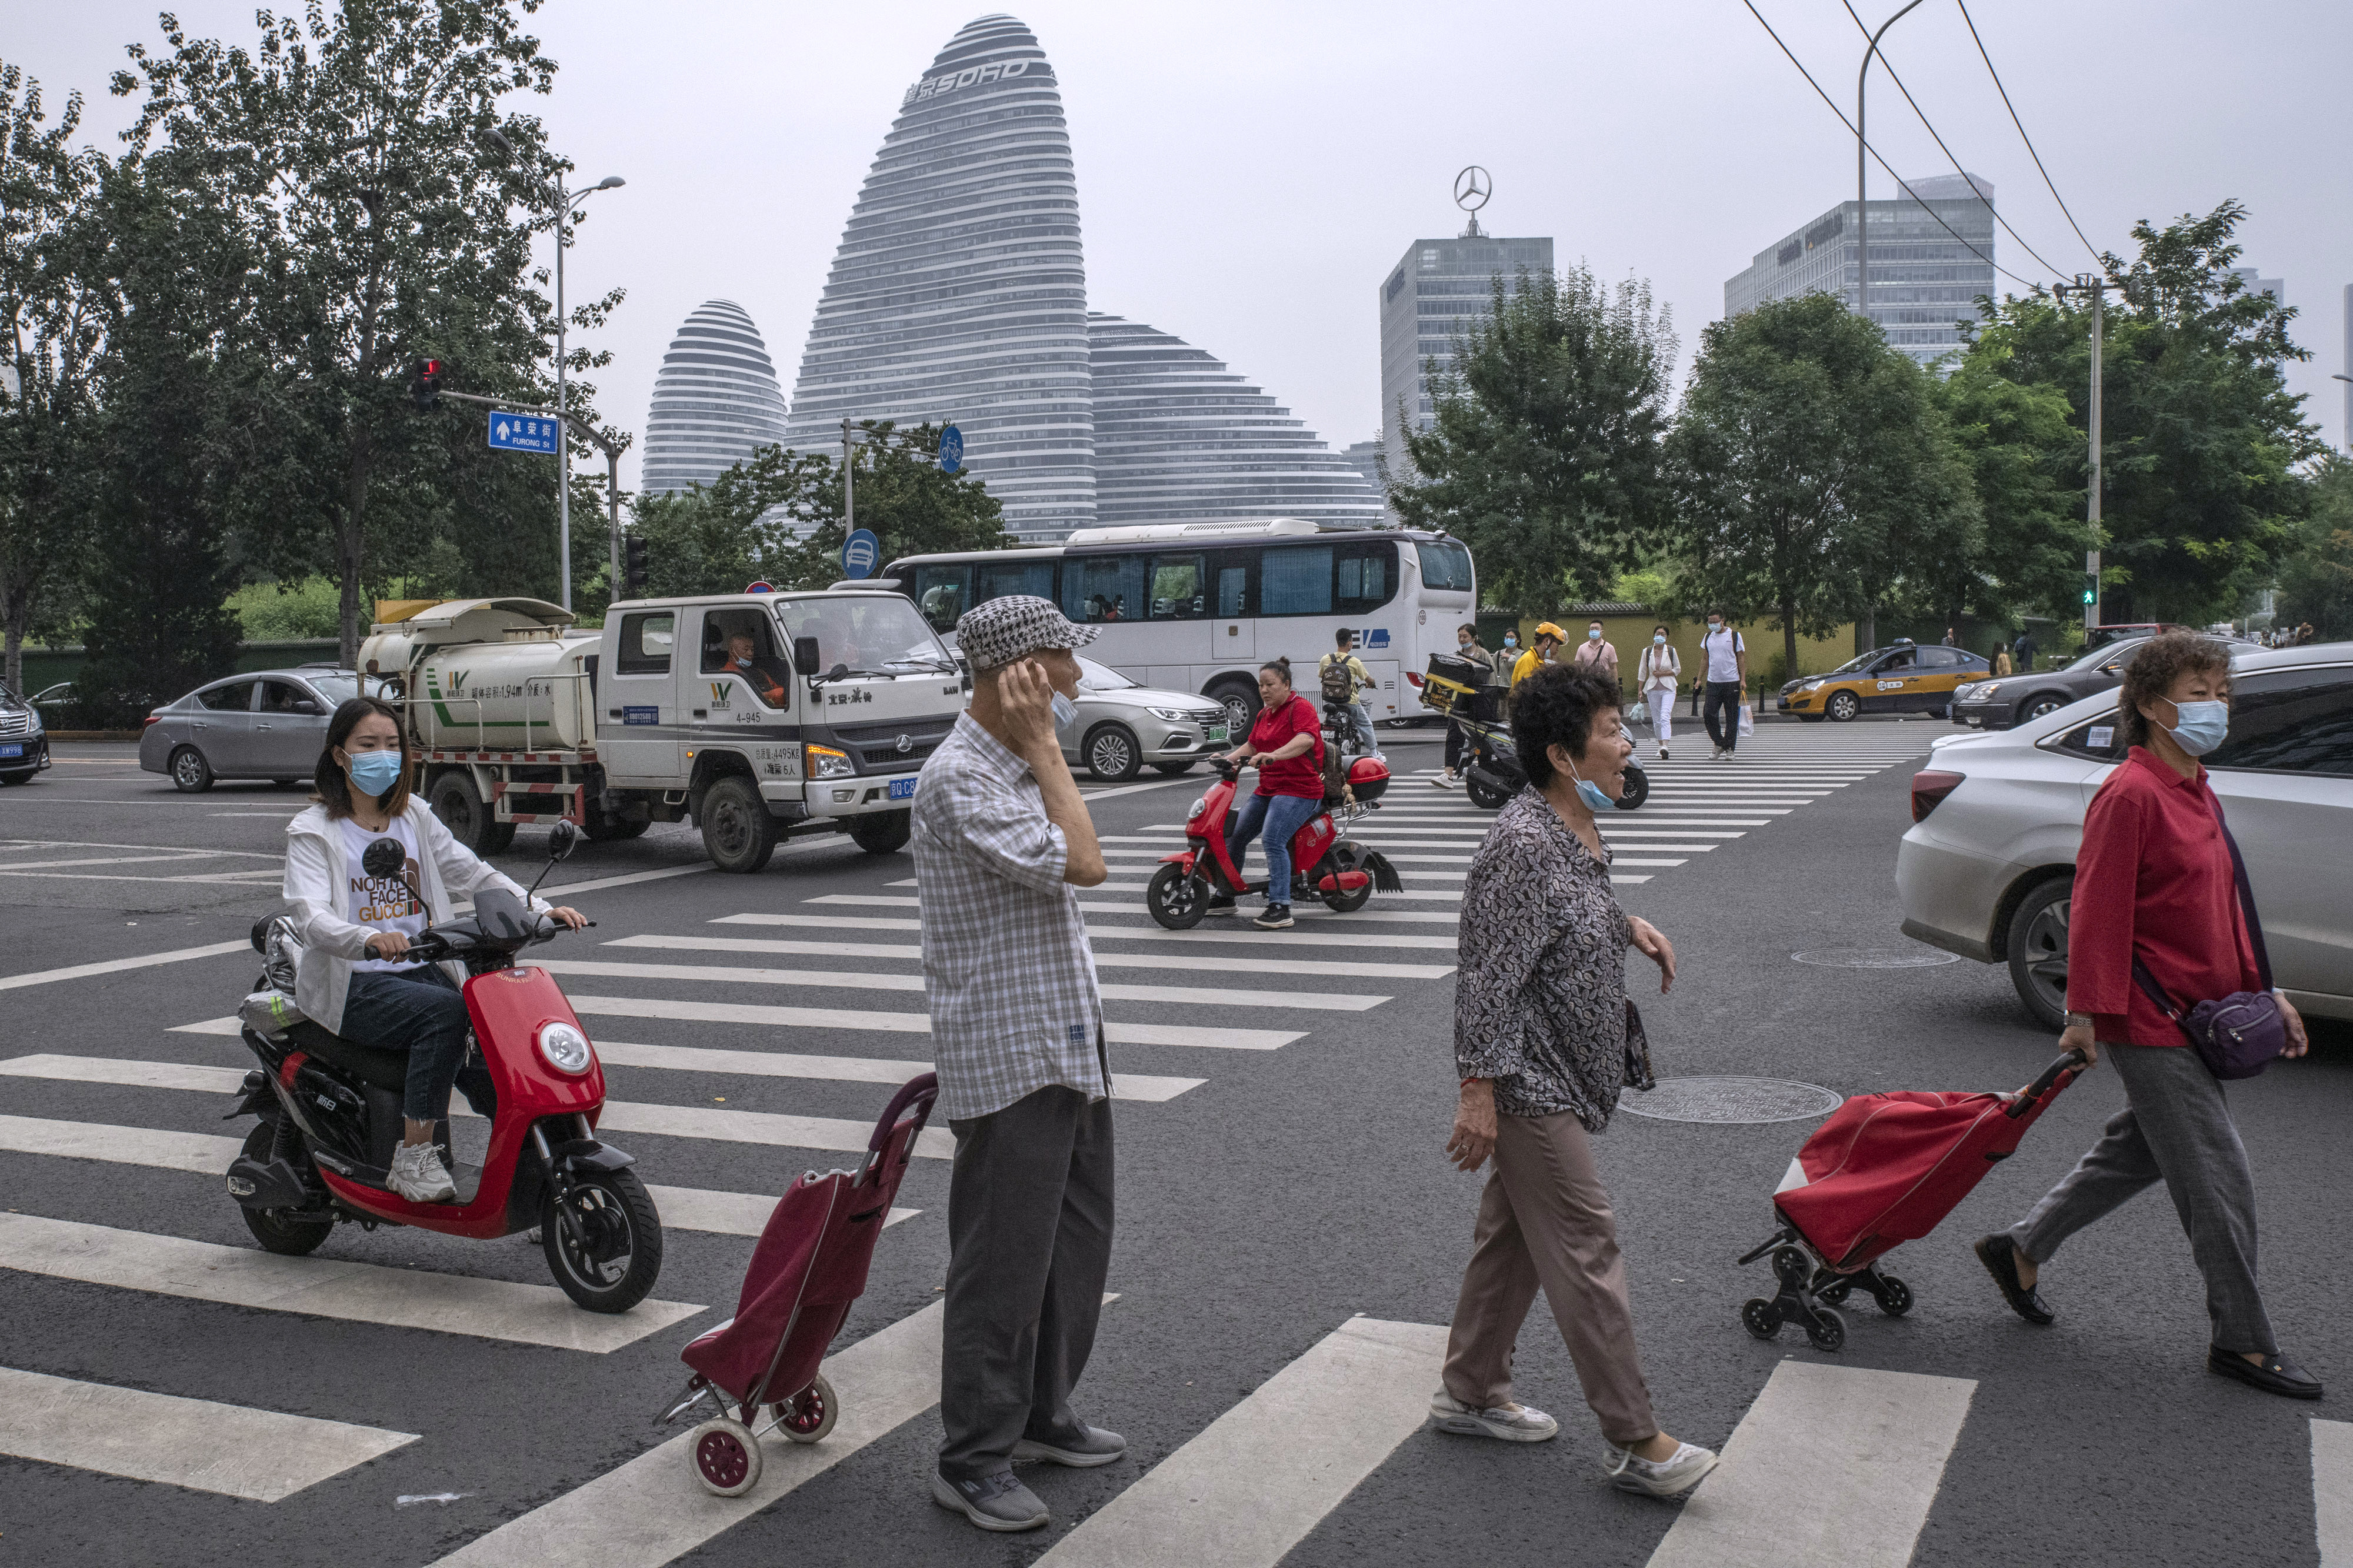 Pedestrians cross a road in Beijing on September 14, 2021. Most of China’s tax revenues come from value-added taxes, consumption (luxury) taxes and social security contributions, which are regressive. Photo: Bloomberg